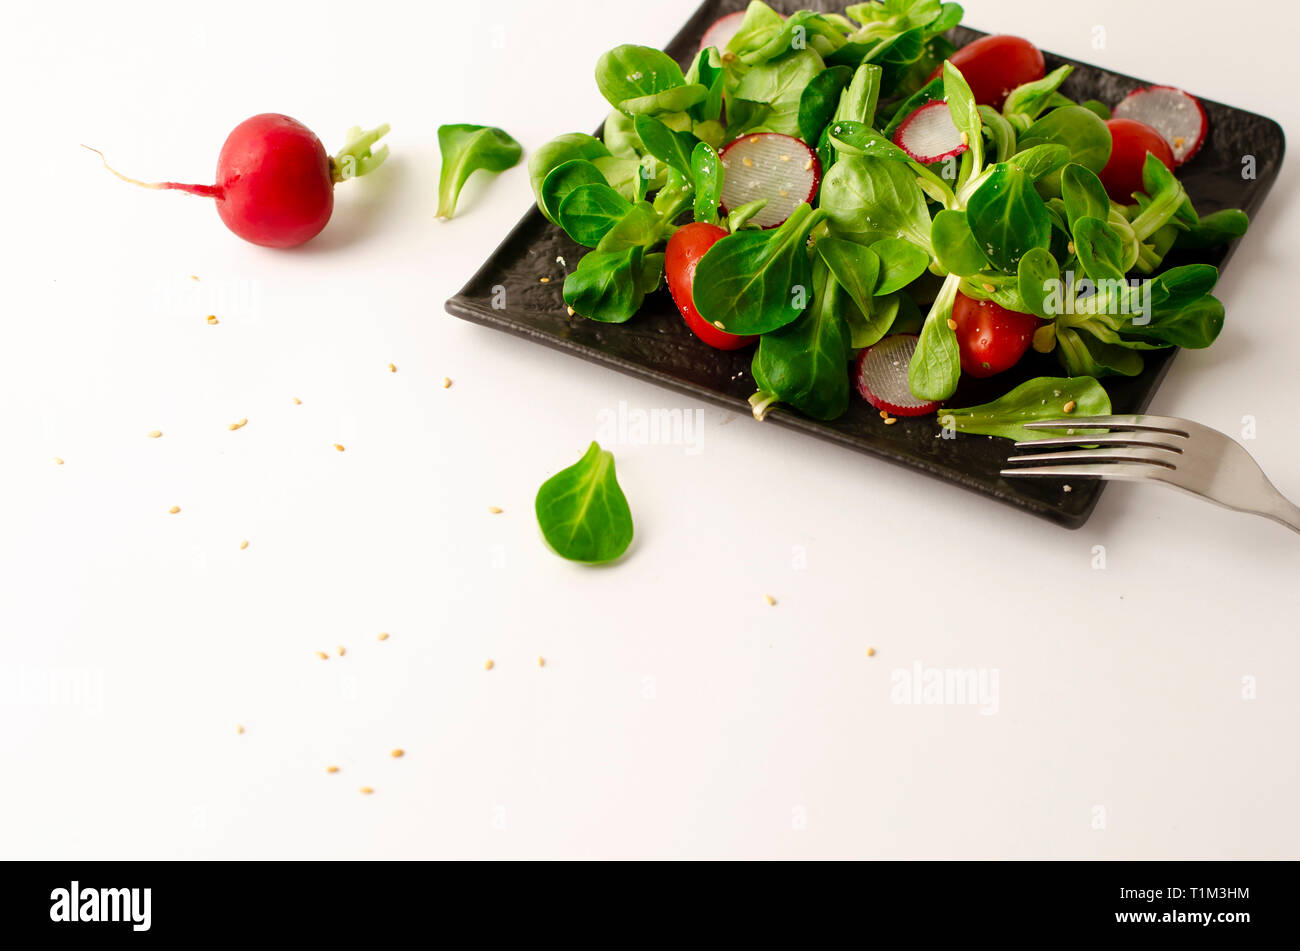 Healthy breakfast or lunch. Fresh vegetable salad of radish, tomatoes and corn salad or Valerianella locusta. Close up on black plate. Diet and vegeta Stock Photo